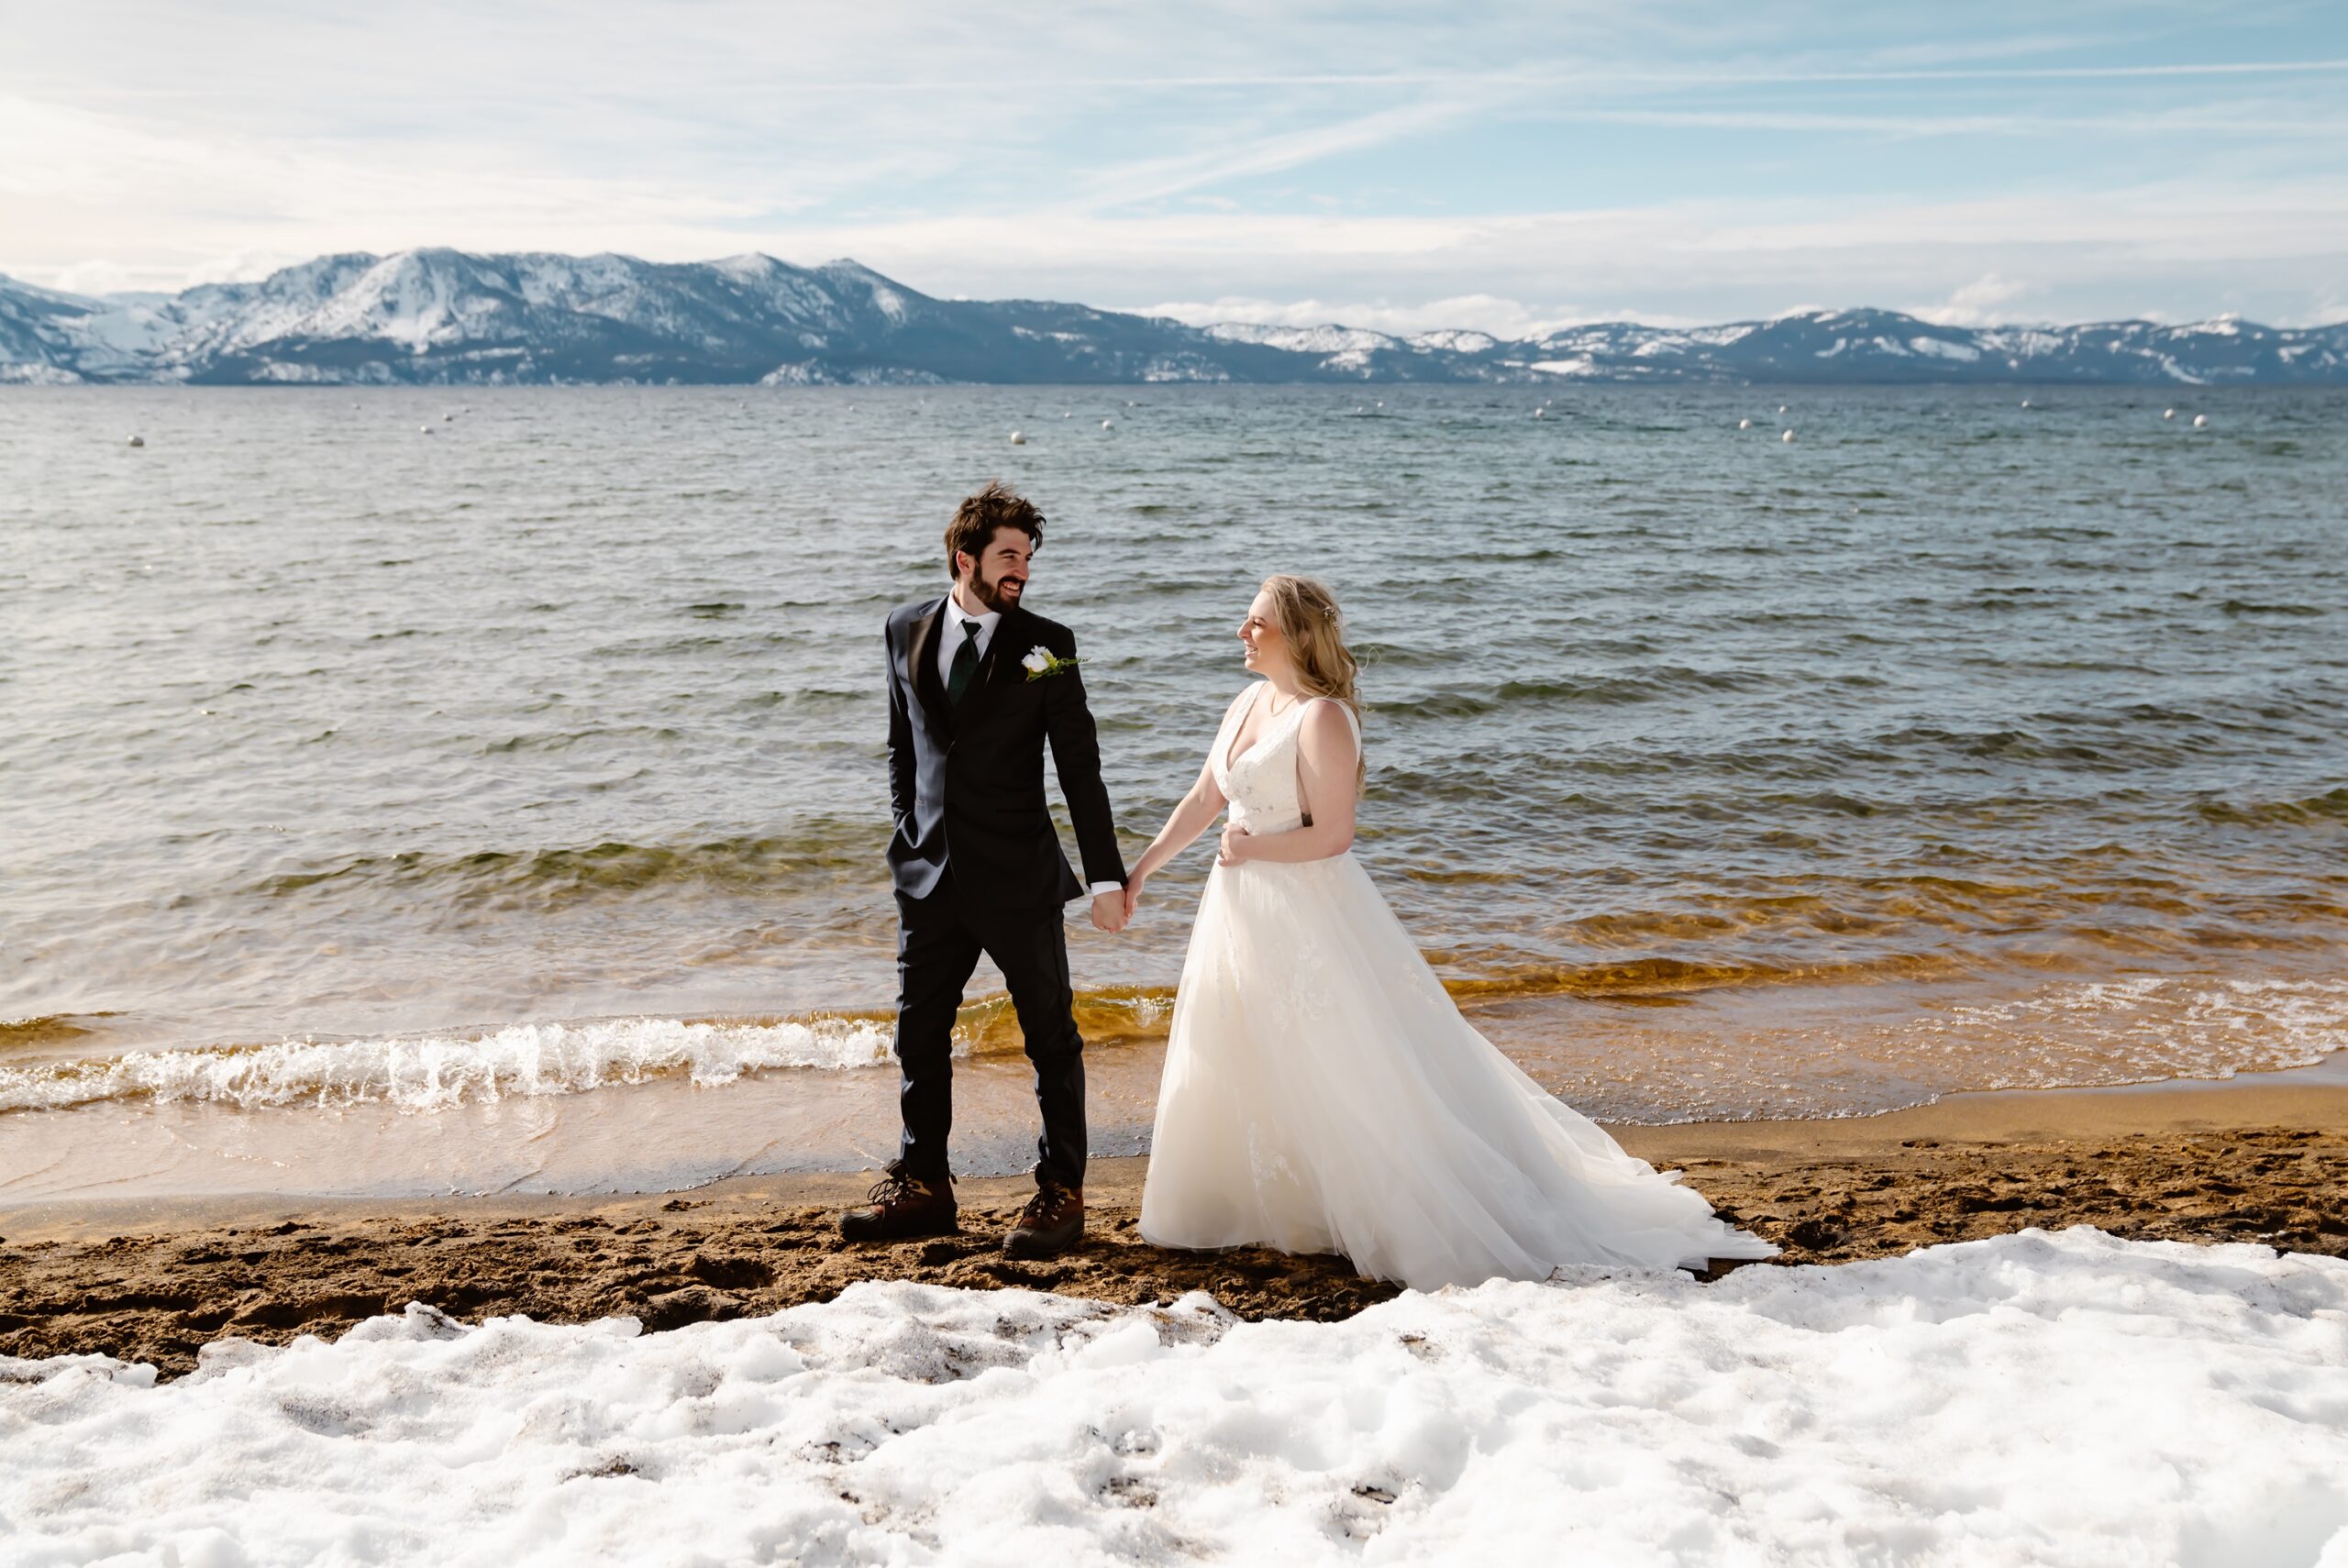 Bride and groom on the beach of Zephyr Cove